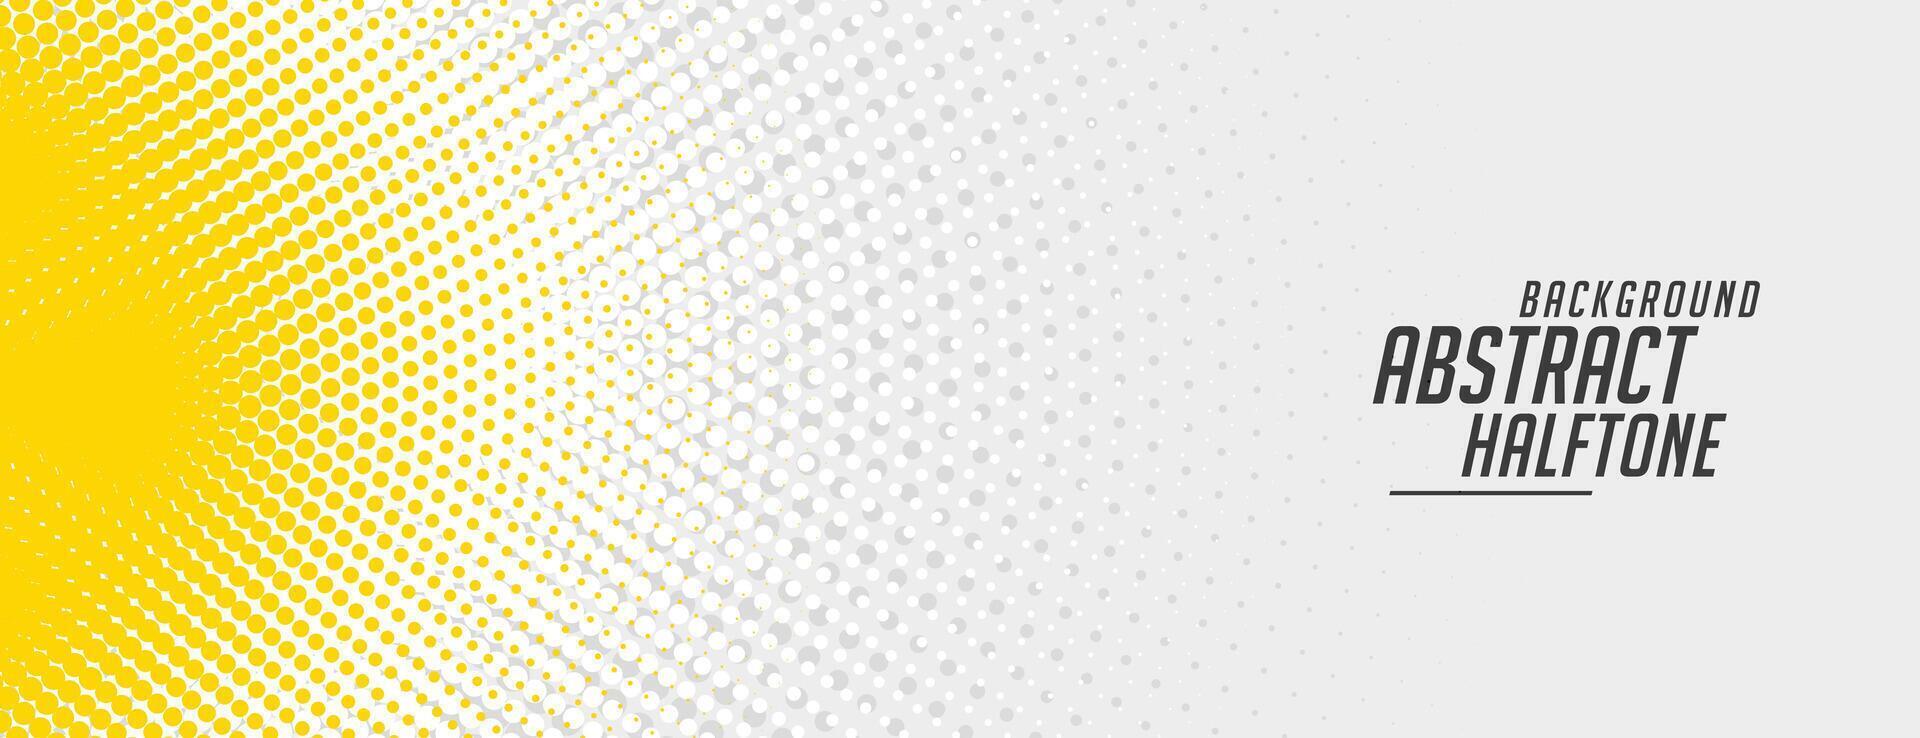 abstract yellow and white halftone banner design vector